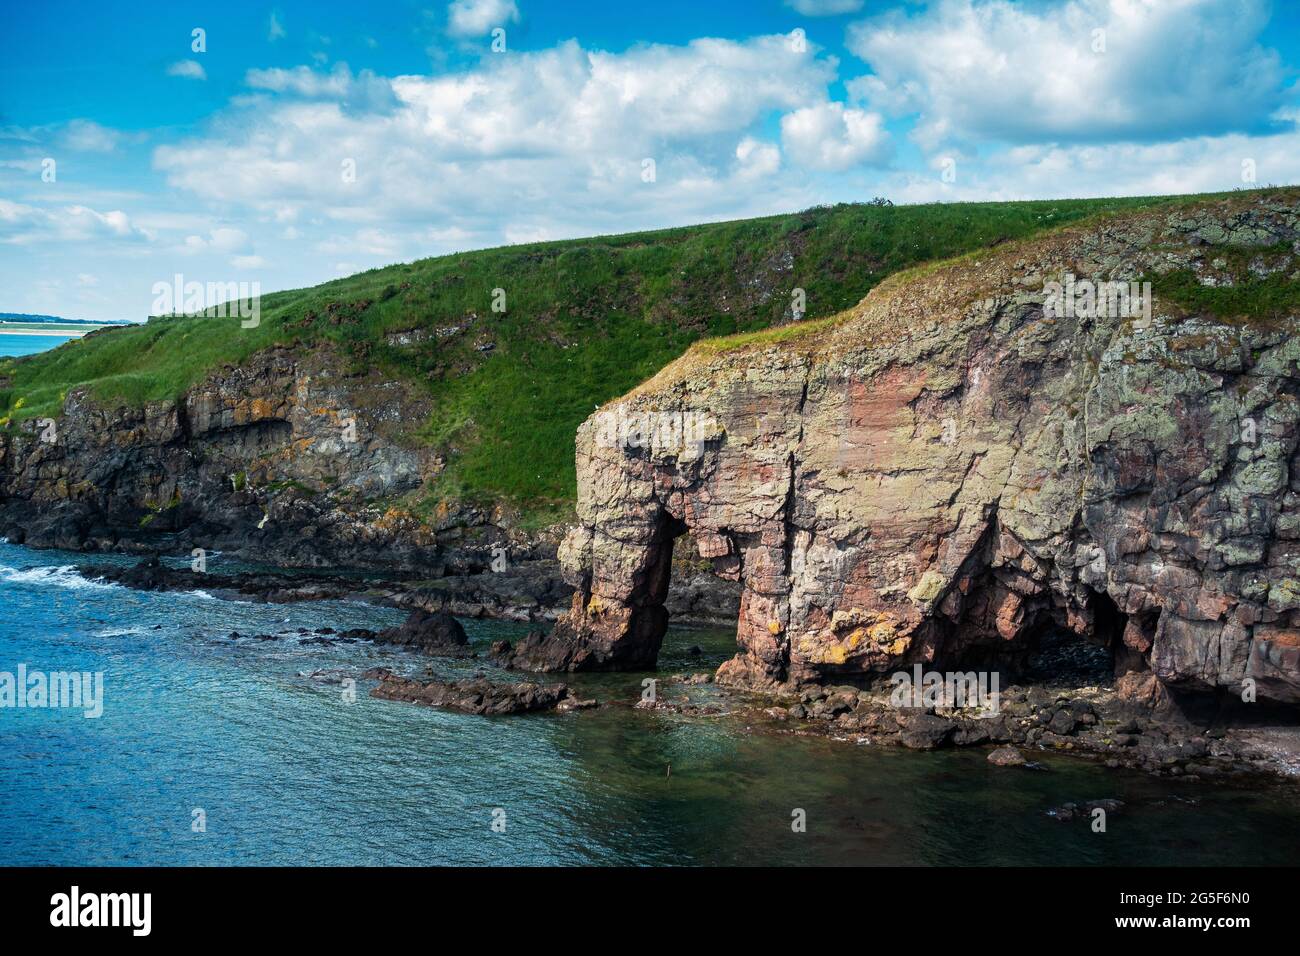 The unusual cliff formation known as Elephant Rock near Montrose, Scotland Stock Photo